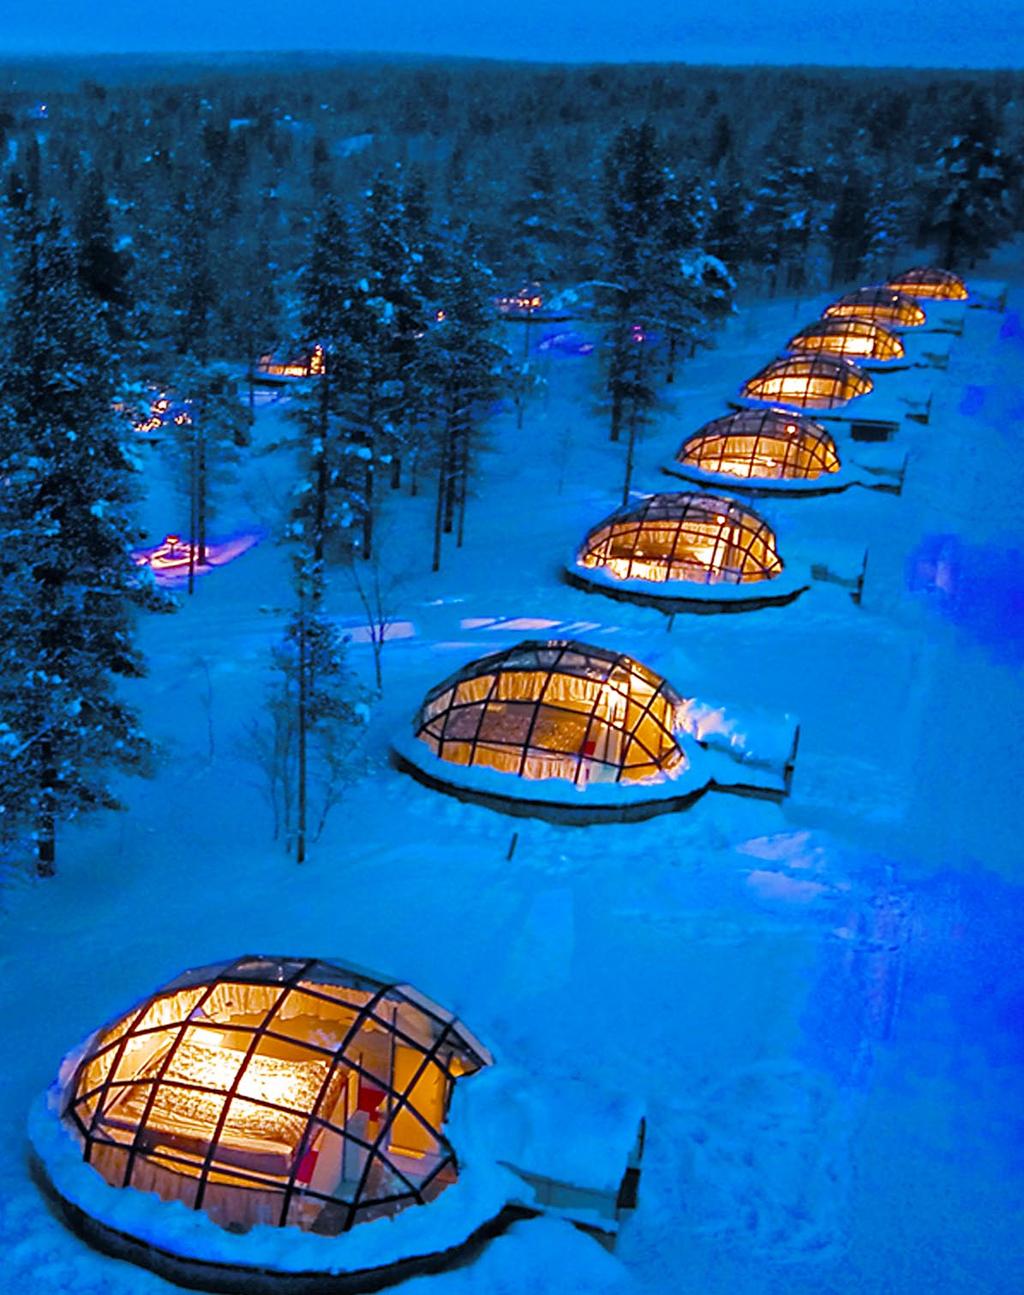 It was the glass igloos and log cabins that put us on the world map.